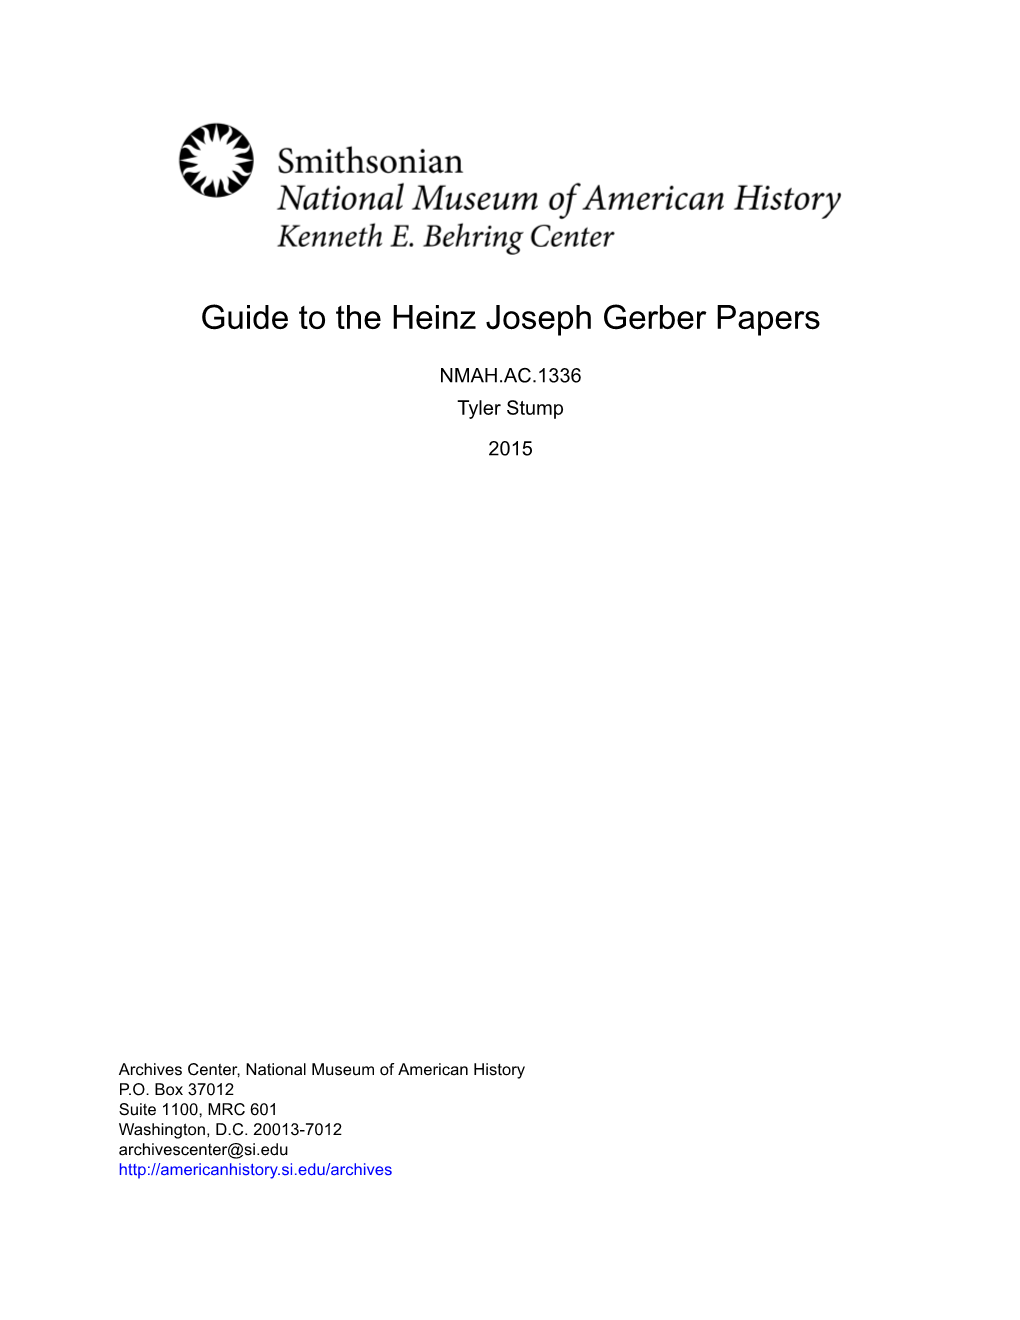 Guide to the Heinz Joseph Gerber Papers